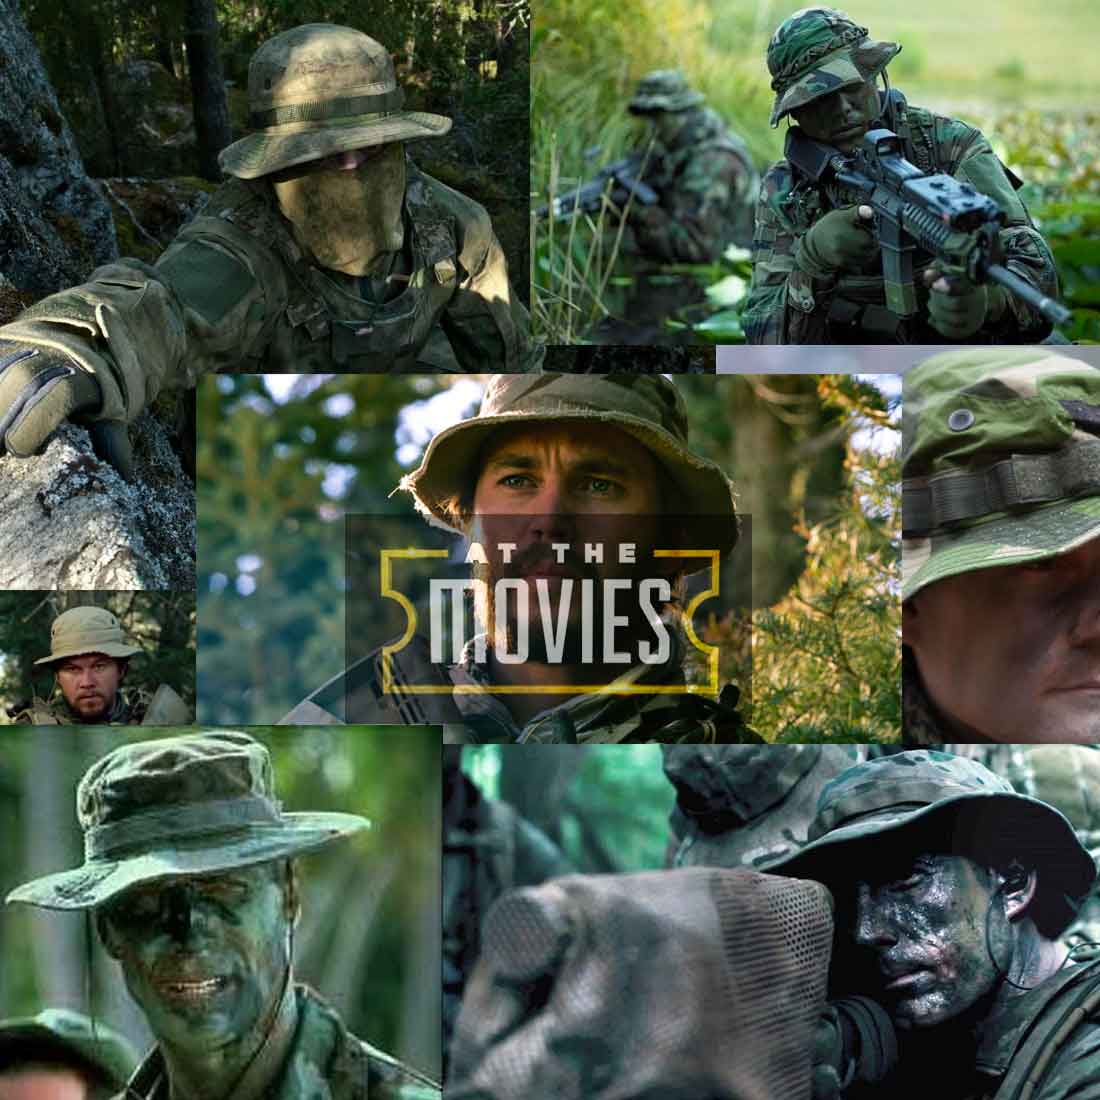 Boonie Army Hats like at the movies on 10kya.com India